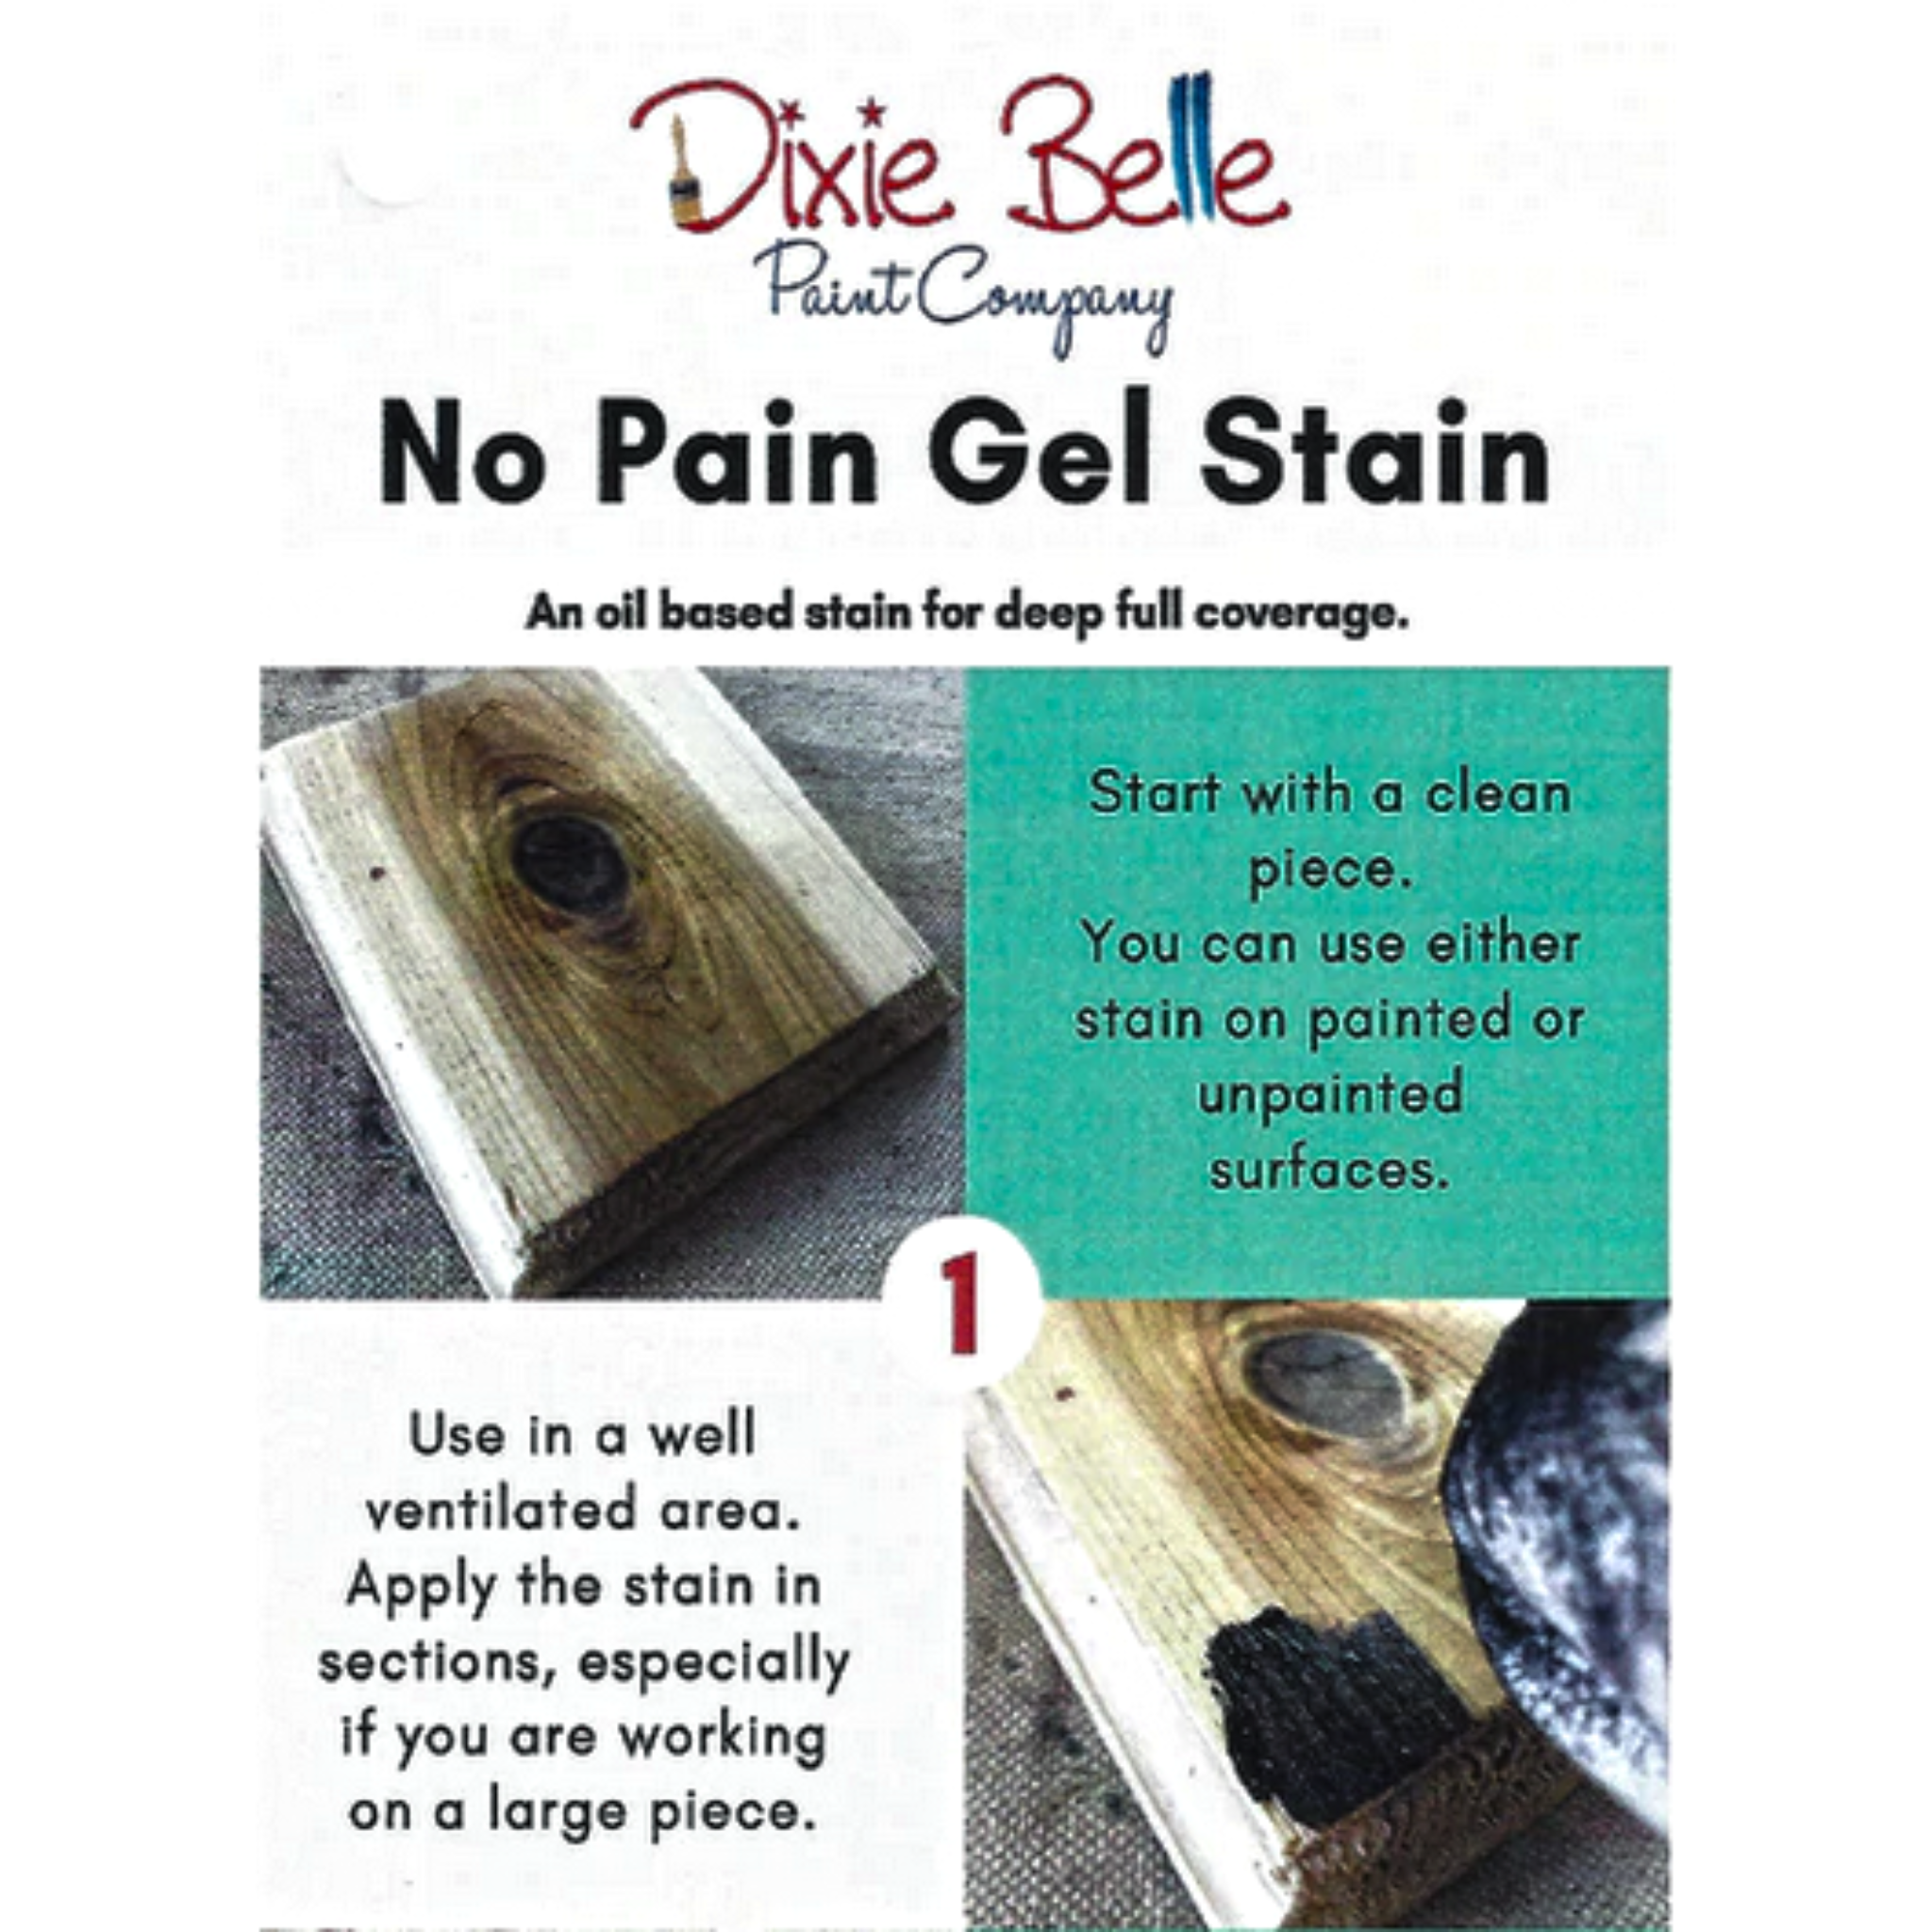 Directions for Dixie Belle's No Pain Gel Stain. An oil-based stain for deep full coverage. Step 1 - Start with a clean piece. You can use either stain on painted or unpainted surfaces. Use in a well ventilated area. Apply the stain in sections, especially if you are working on a large piece.